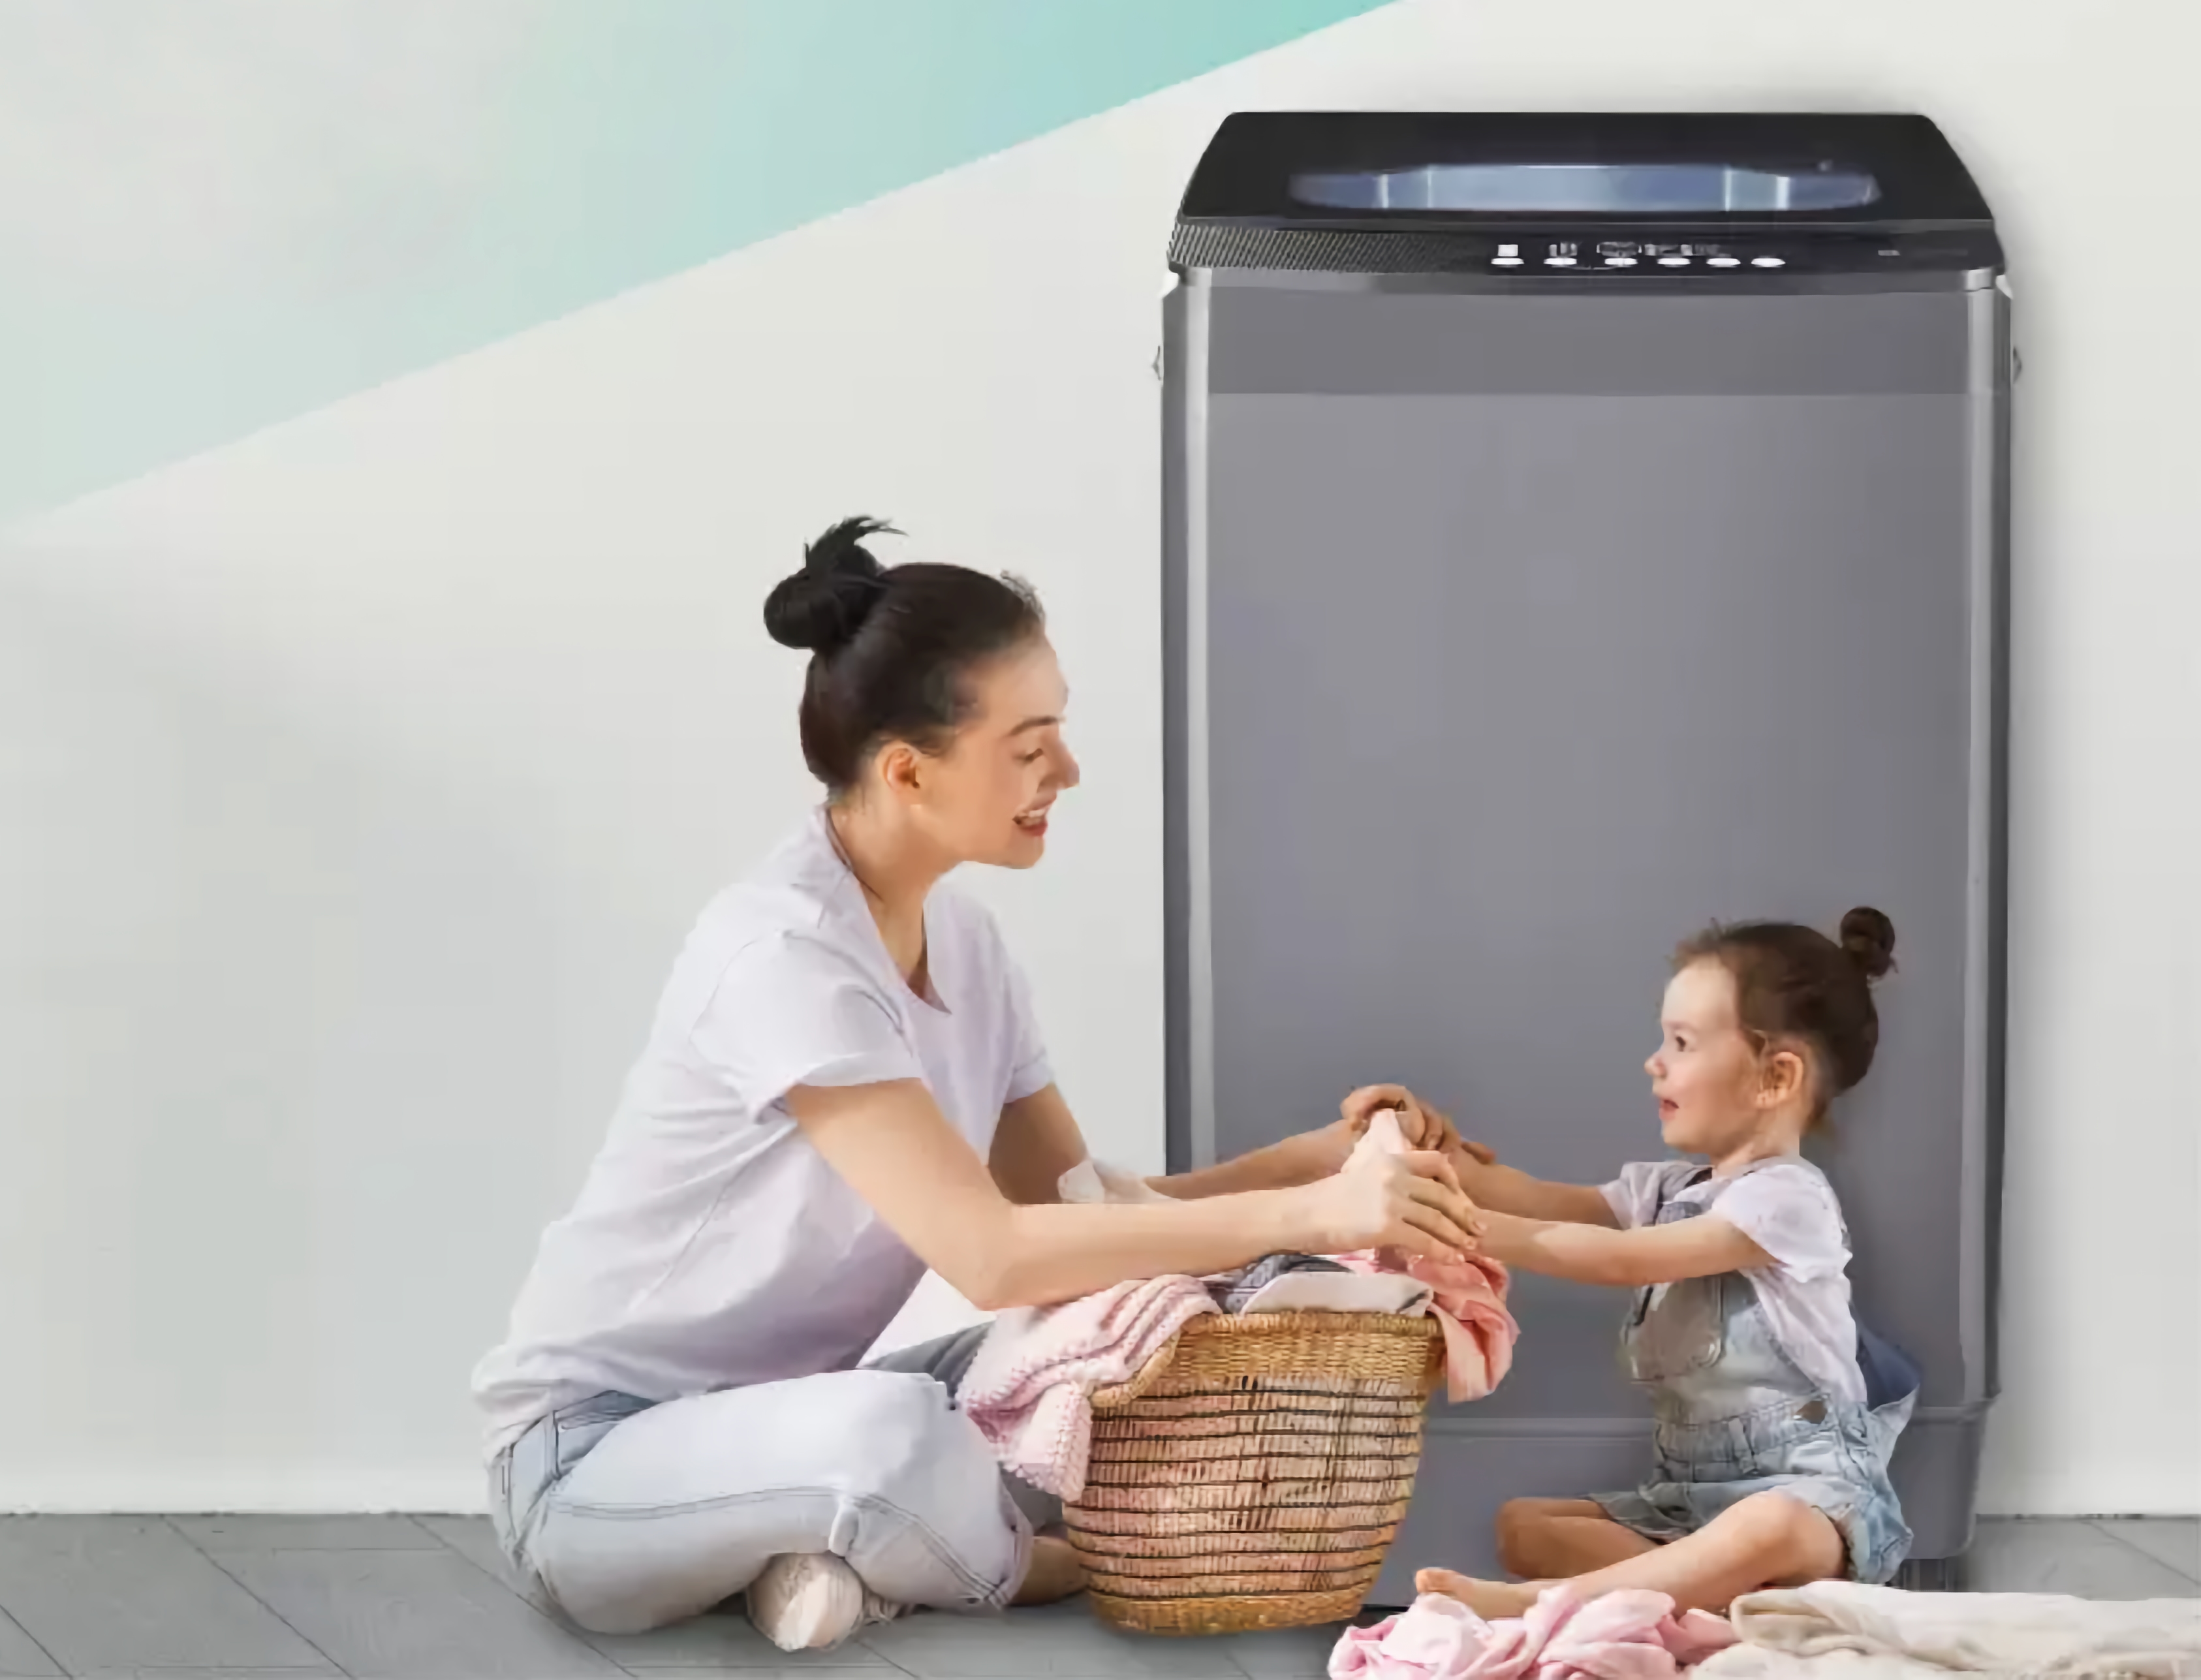 Unexpectedly: Realme unveils its first upright washing machine with a capacity of up to 8kg